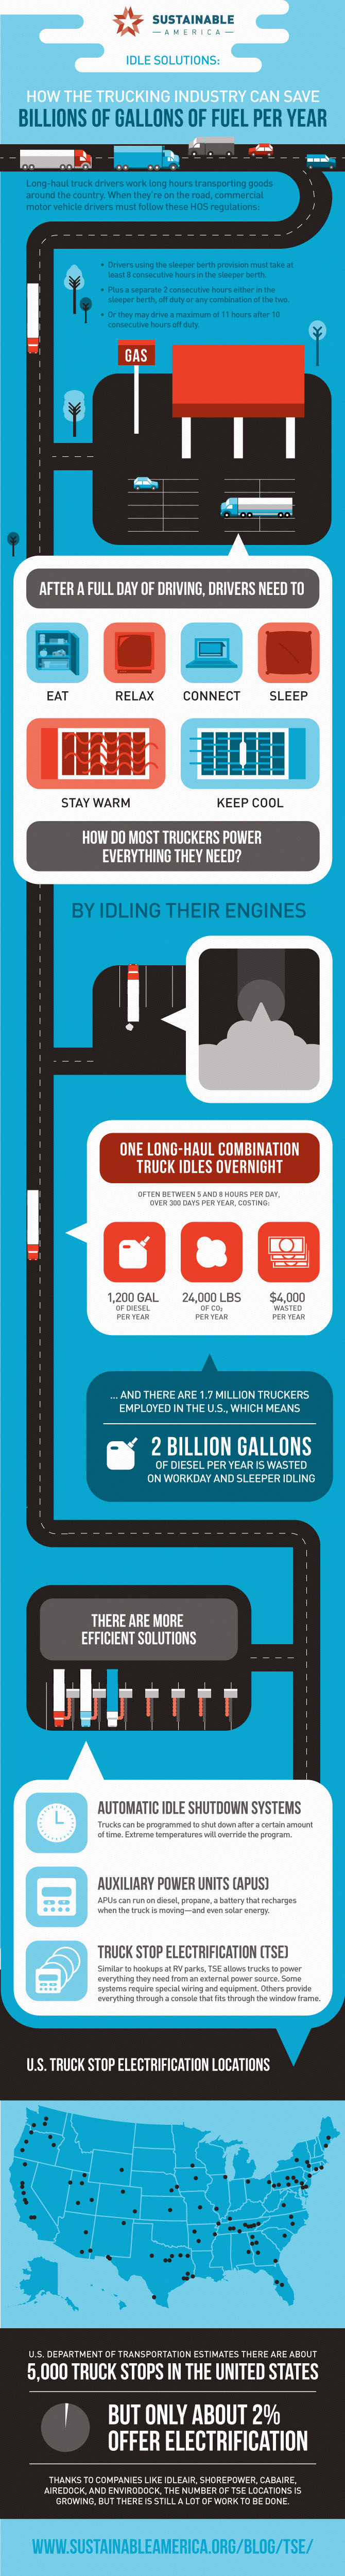 How the Trucking Industry Can Save Billions of Gallons of Fuel Per Year through Idle Reduction Strategies